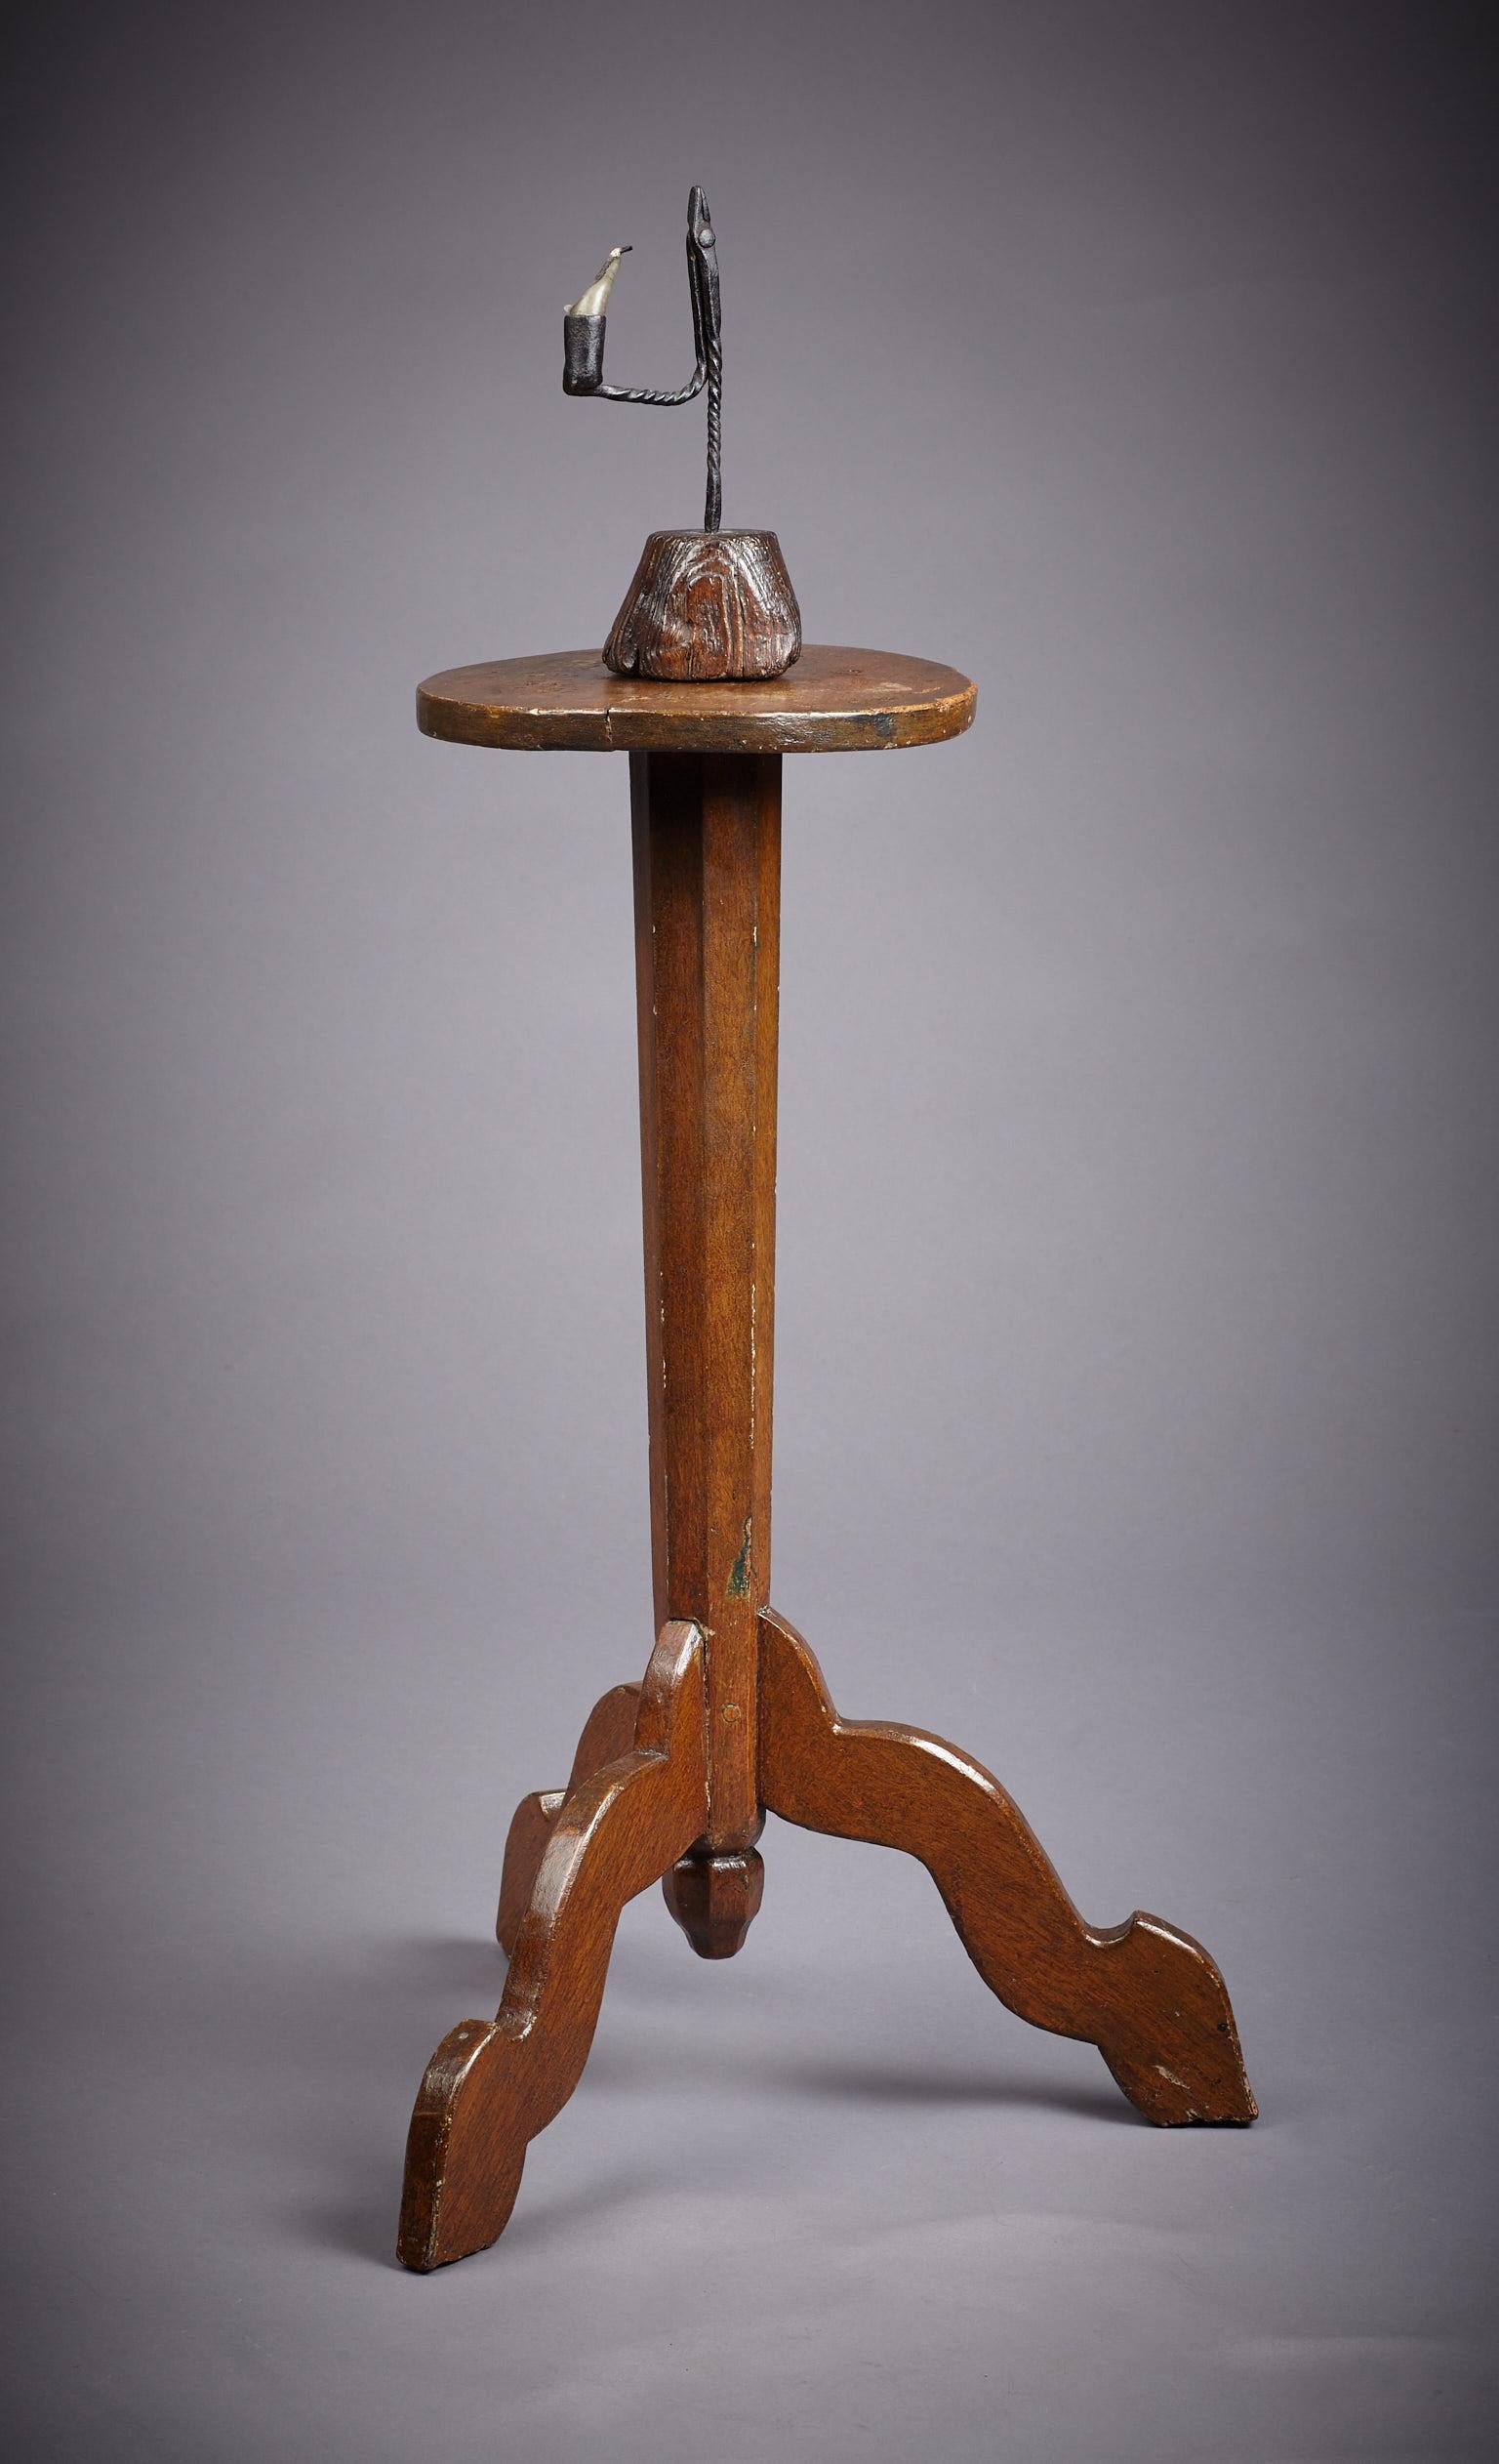 Early 18th century, Queen Anne period, painted oak candle-stand on triform base.

With small circular top above a tapered octagonal chamfered stem, terminating on original octagonal drop, supported on three shaped and splayed legs. Having 19th